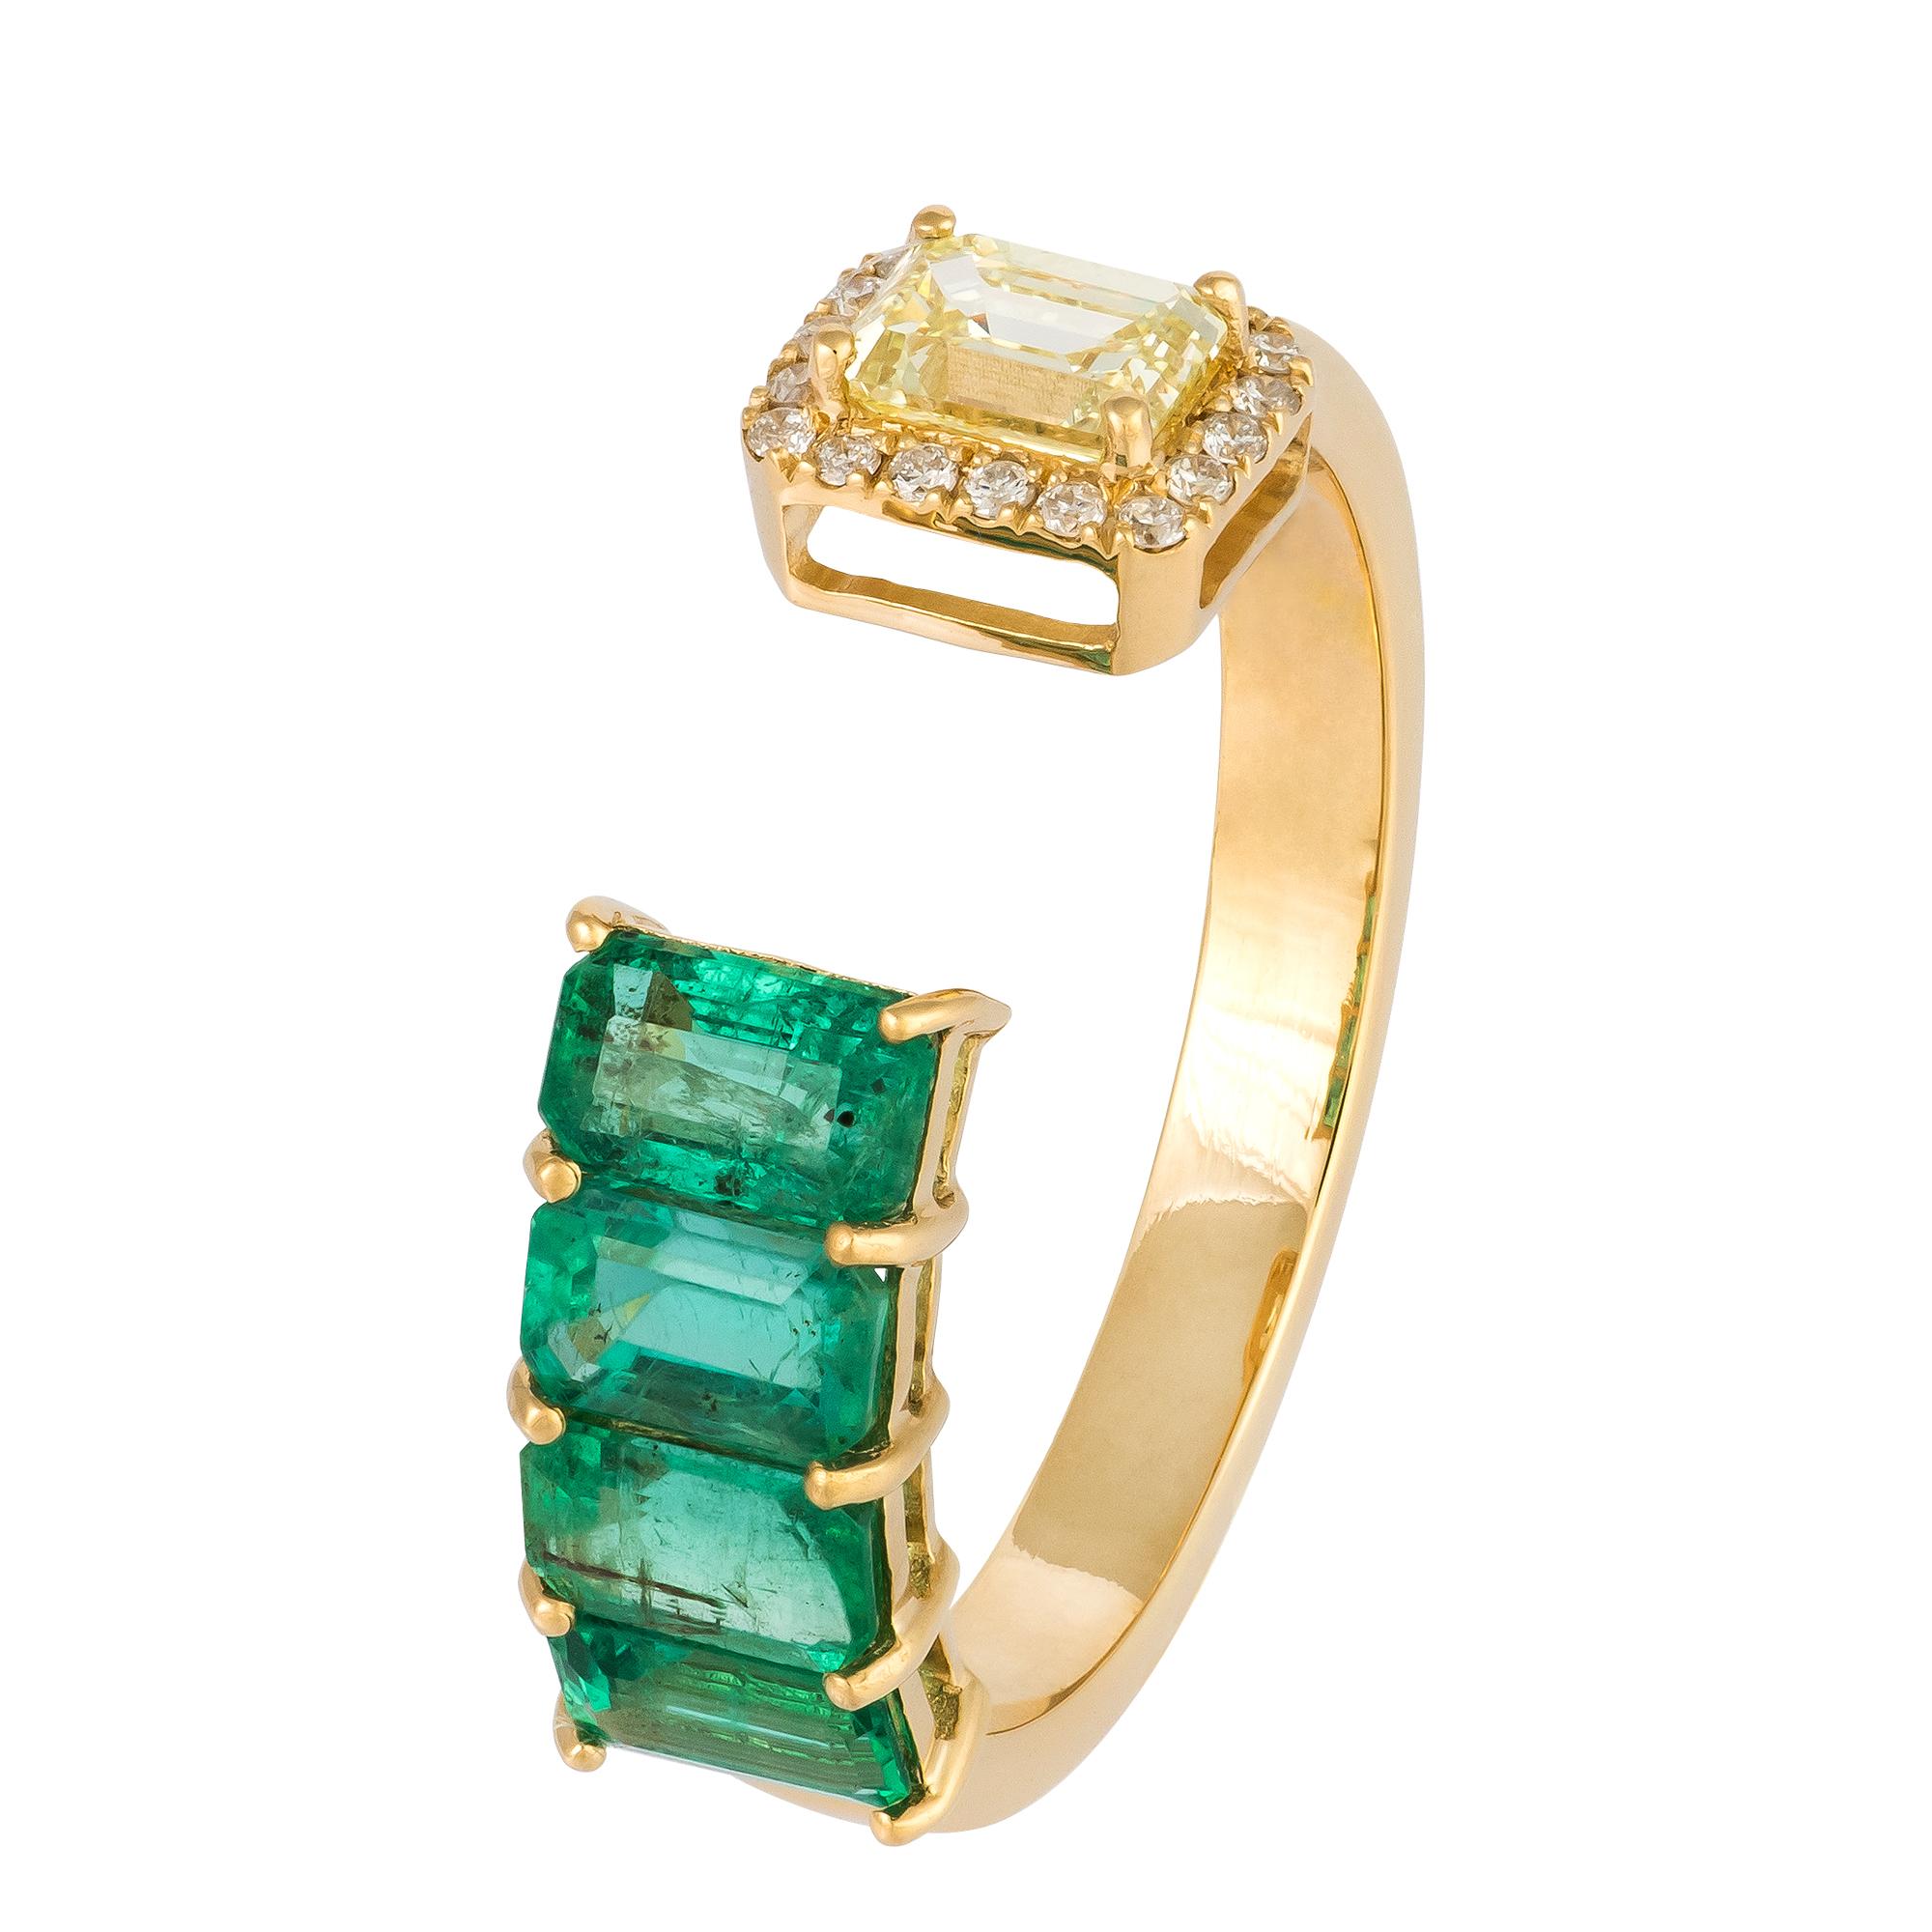 For Sale:  Impressive Emerald Yellow 18K Gold White Diamond Ring for Her 4